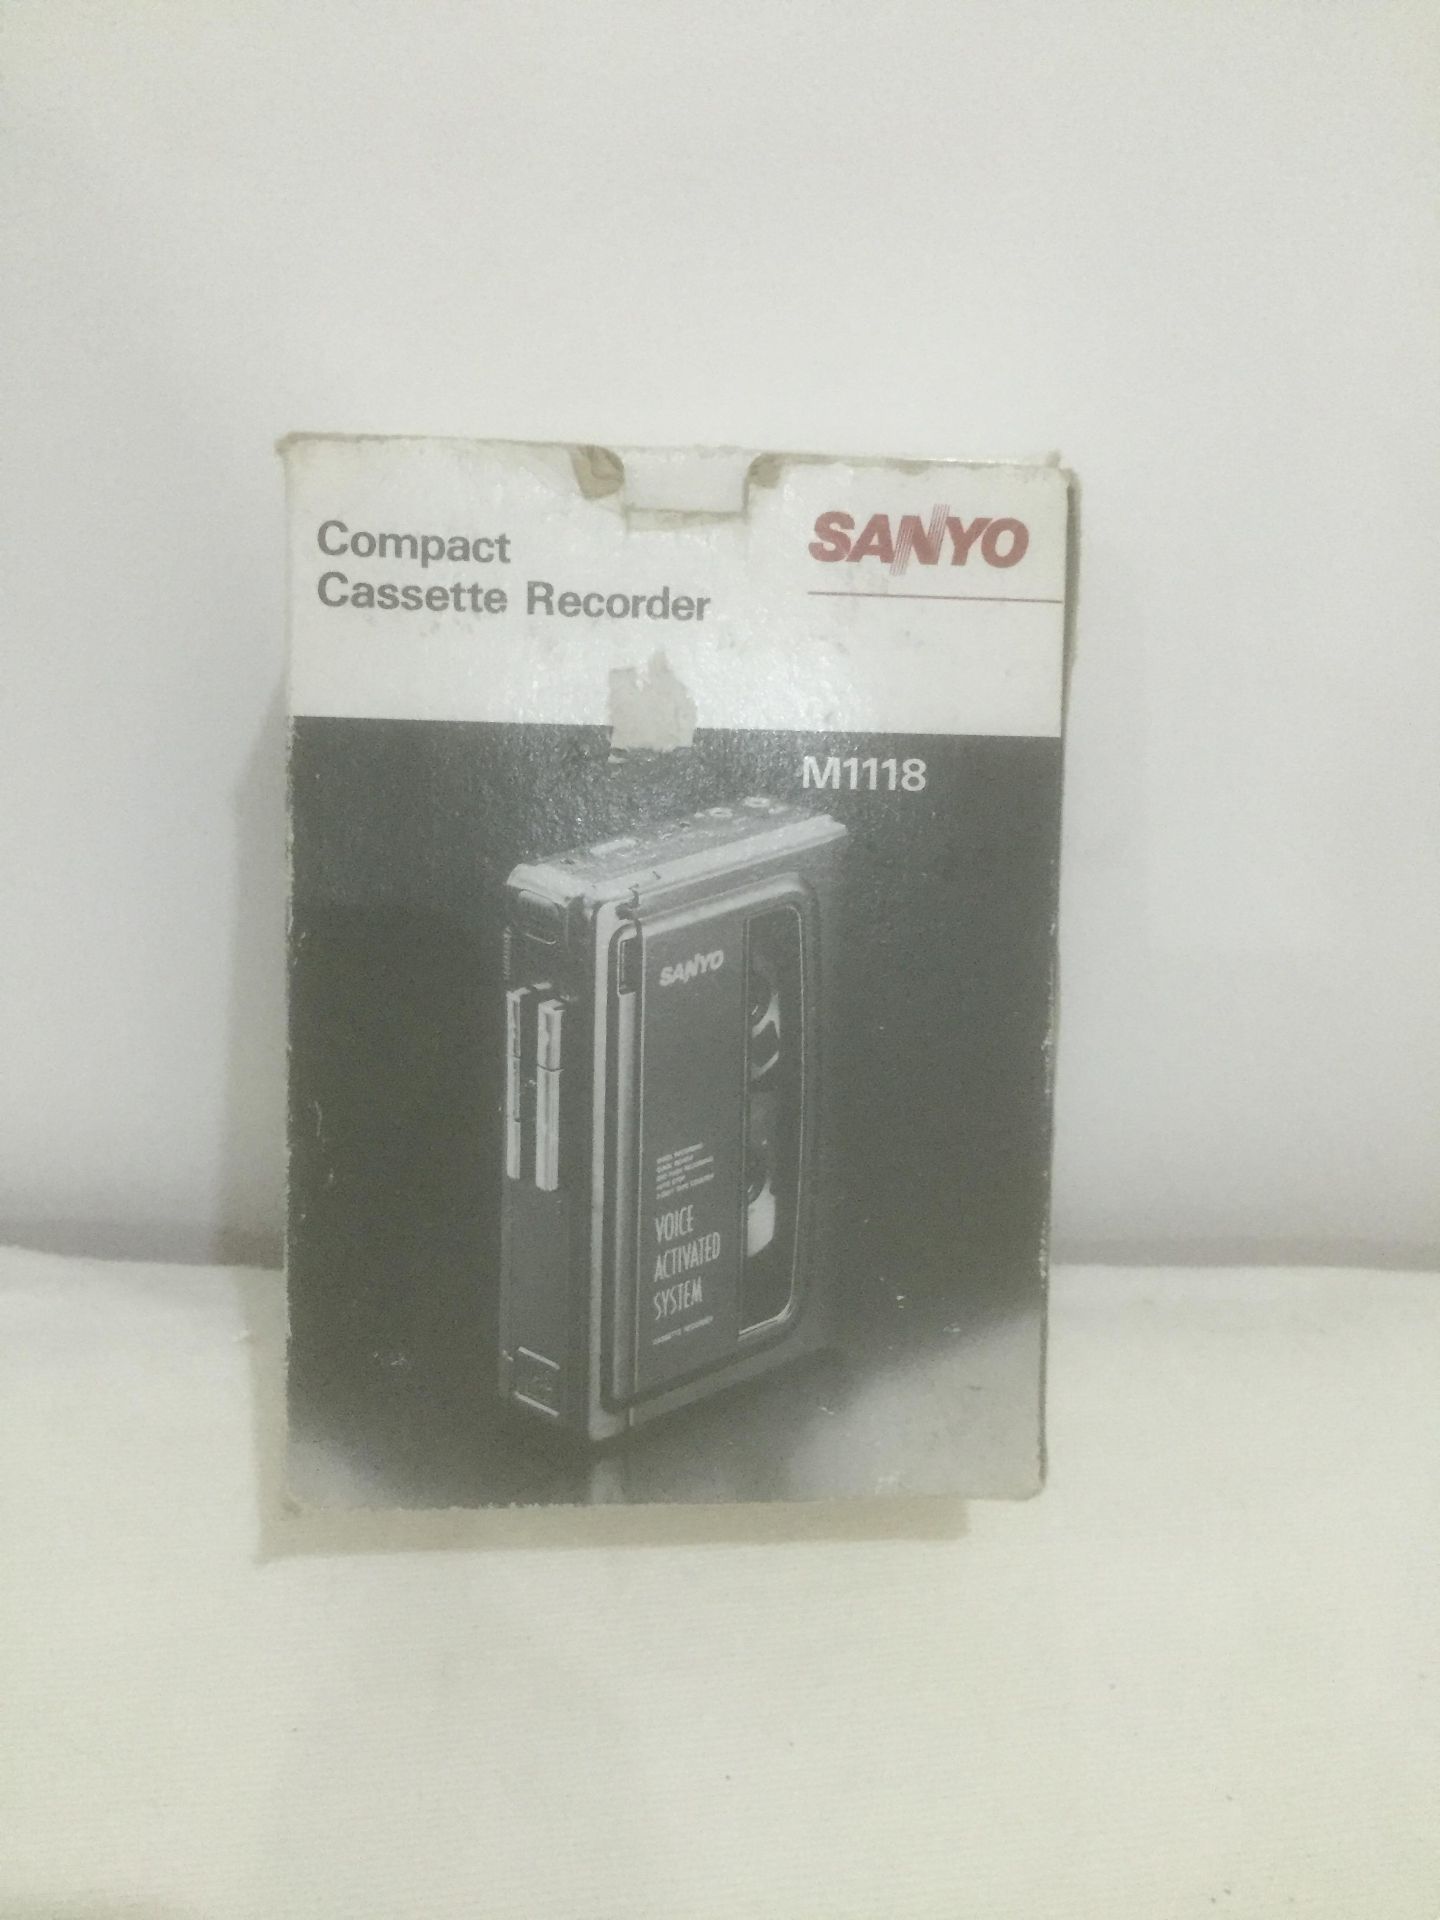 SANYO M1118 COMPACT CASSETTE RECORDER - USED